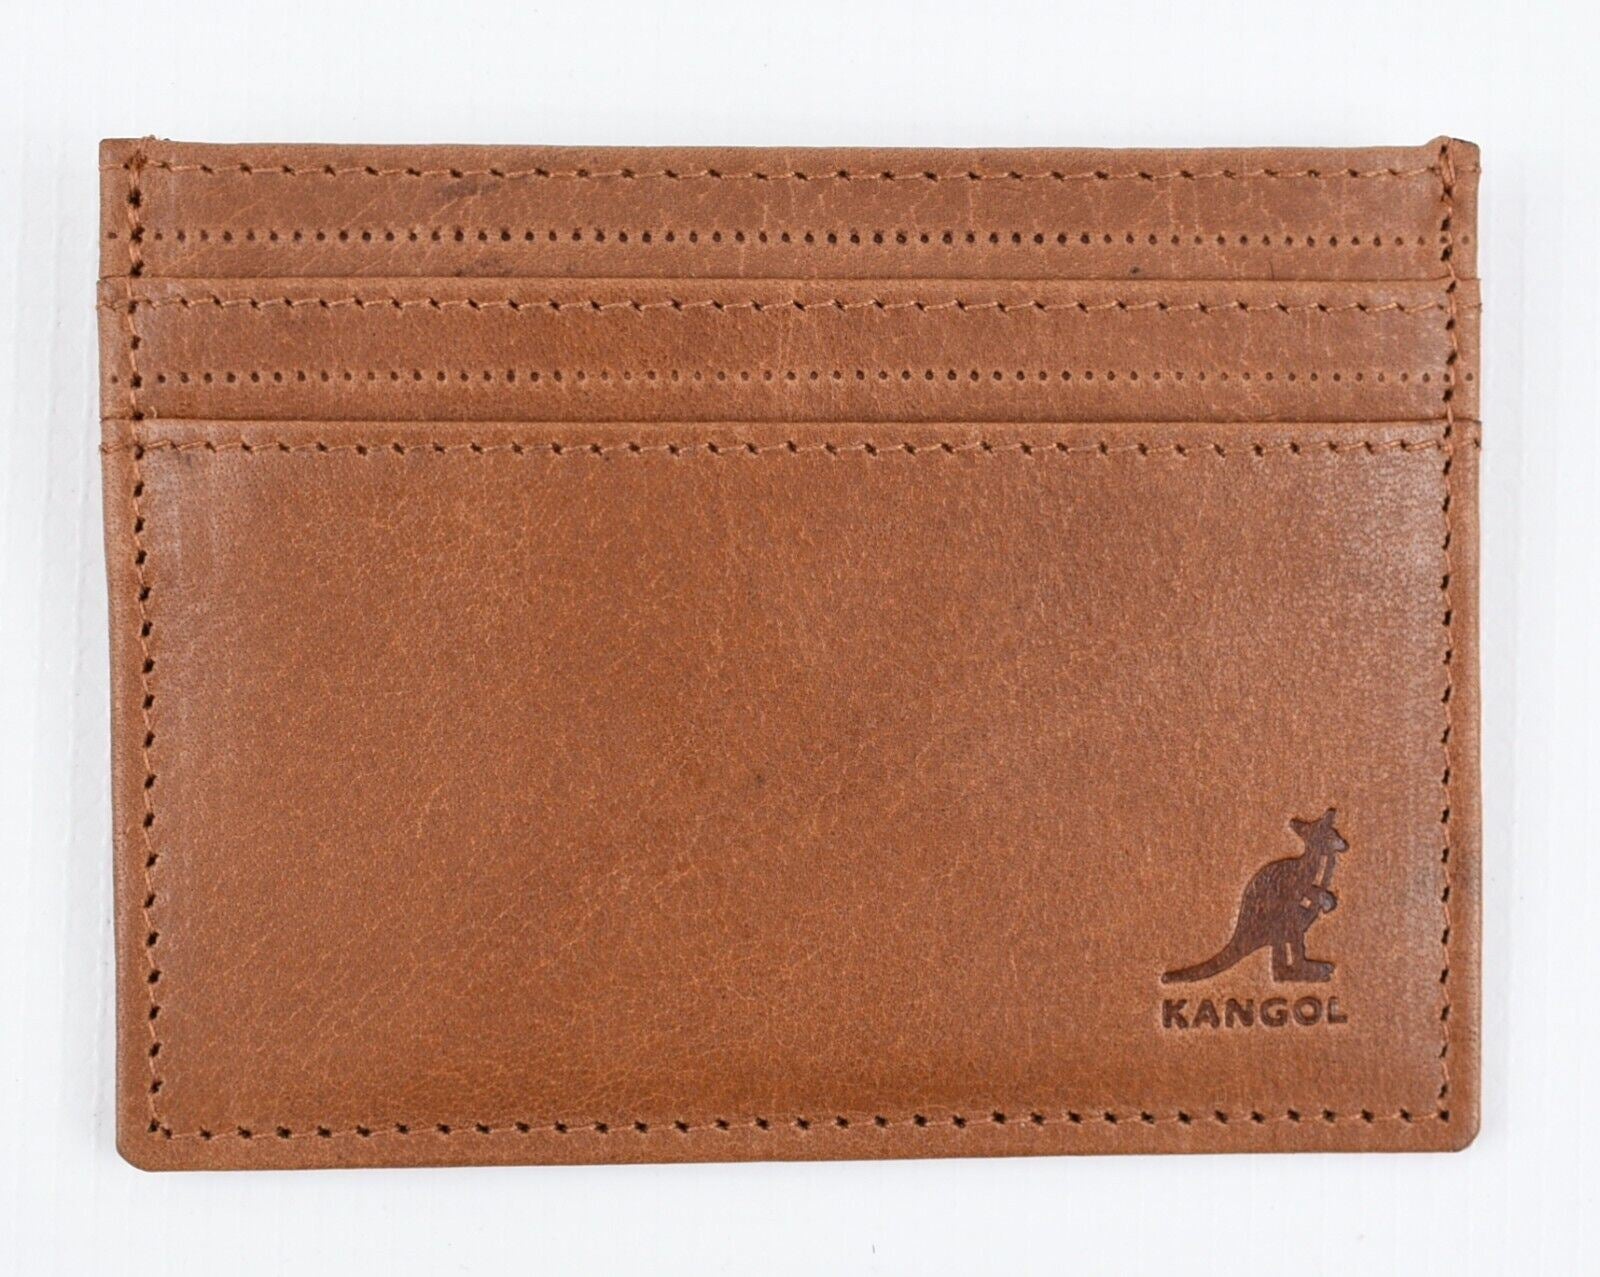 KANGOL Genuine Leather Card Holder, Cognac Brown, Gift Boxed RFID Protected